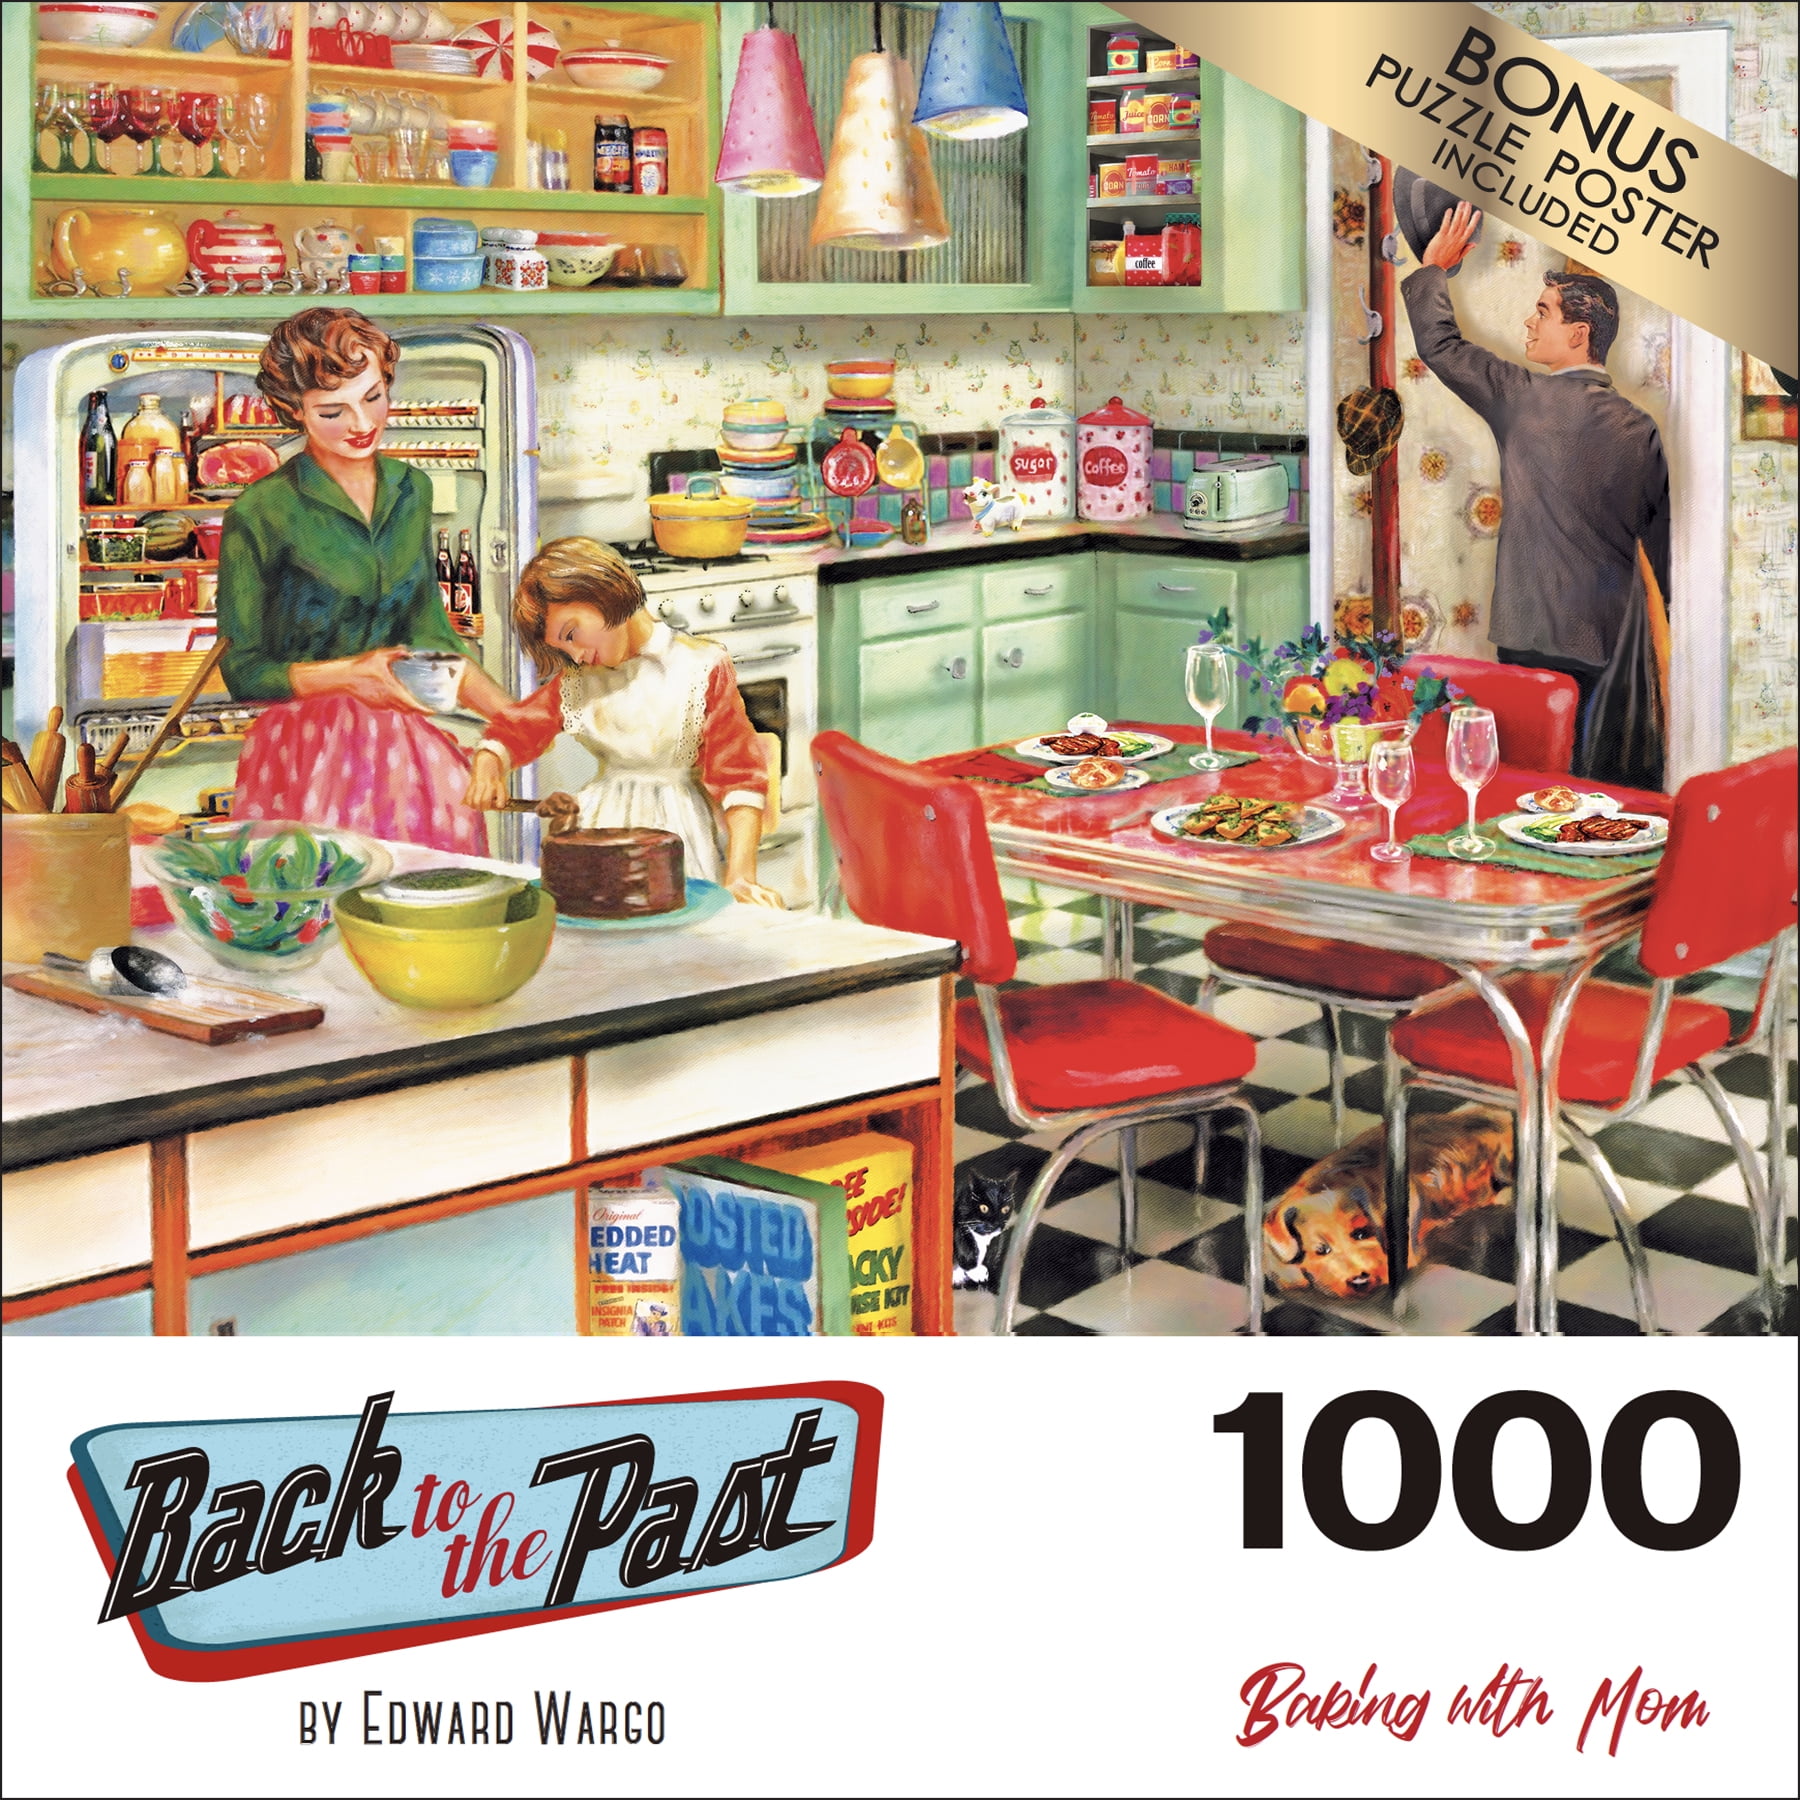 Cra-Z-Art Back to the Past 1000 Piece Jigsaw Puzzle - Baking with Mom -  Walmart.com